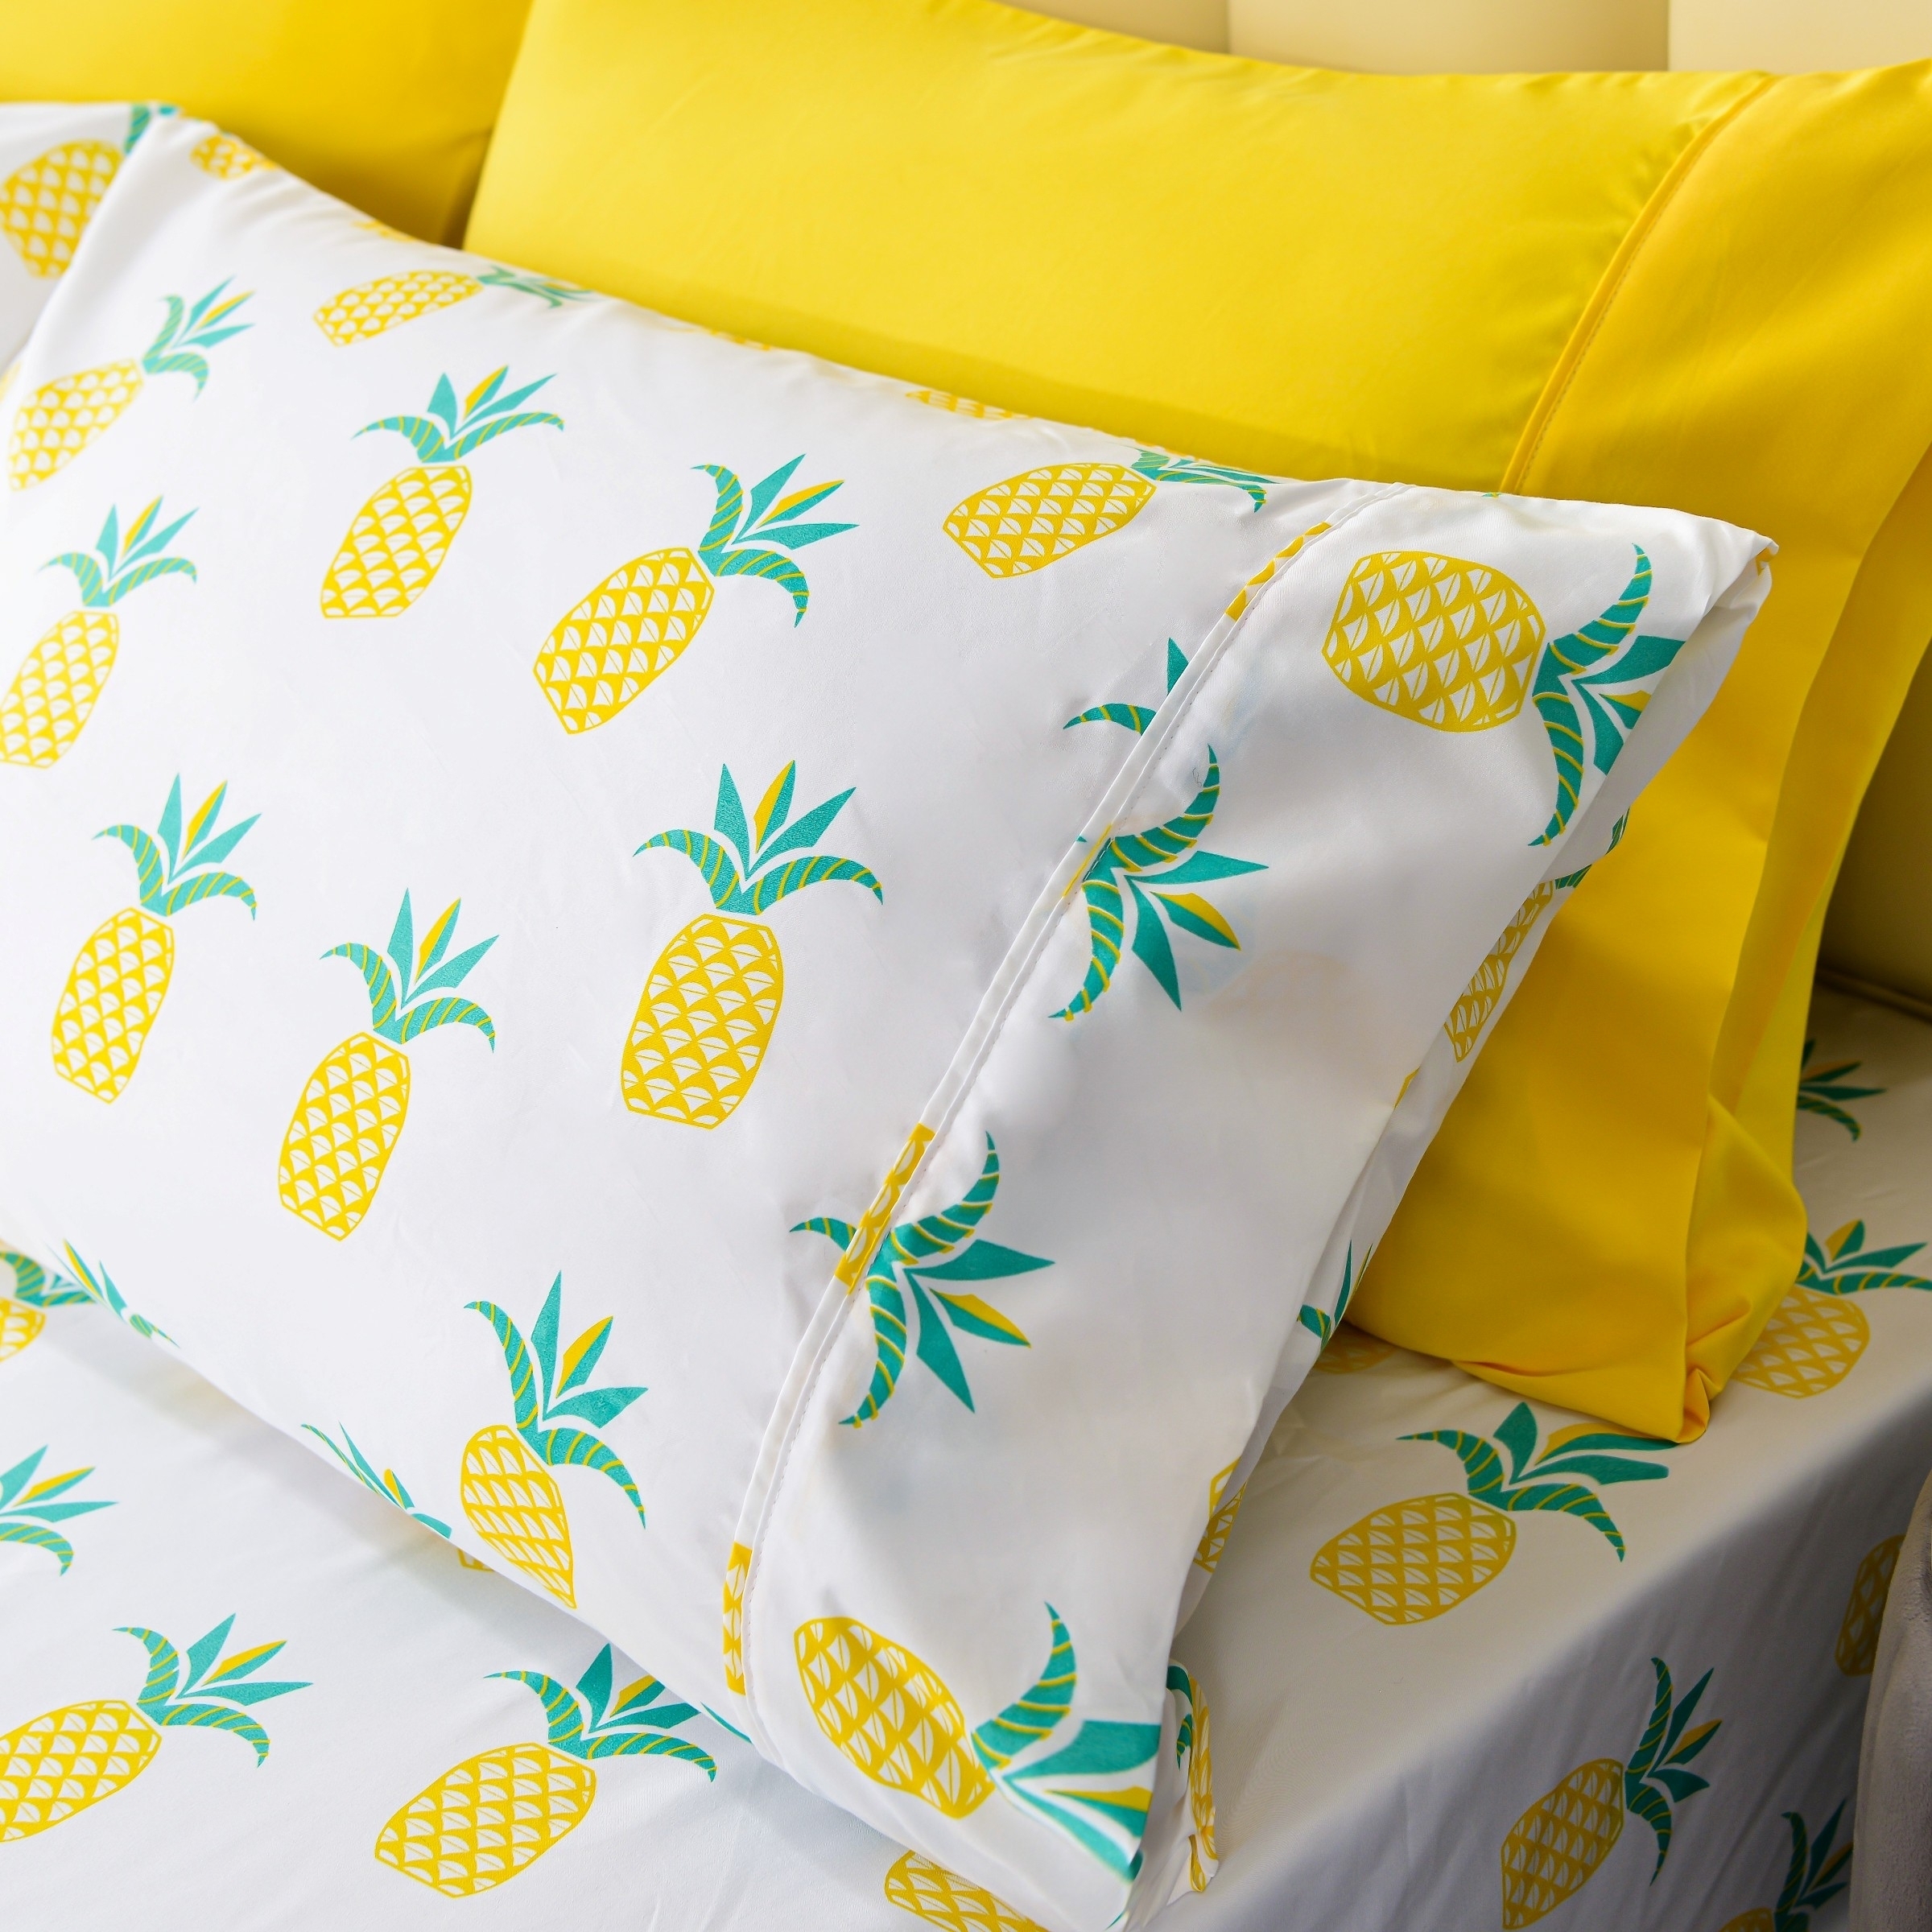 American Home Collection Ultra Soft 4-6 Piece Pineapple Bed Sheet Set - Twin